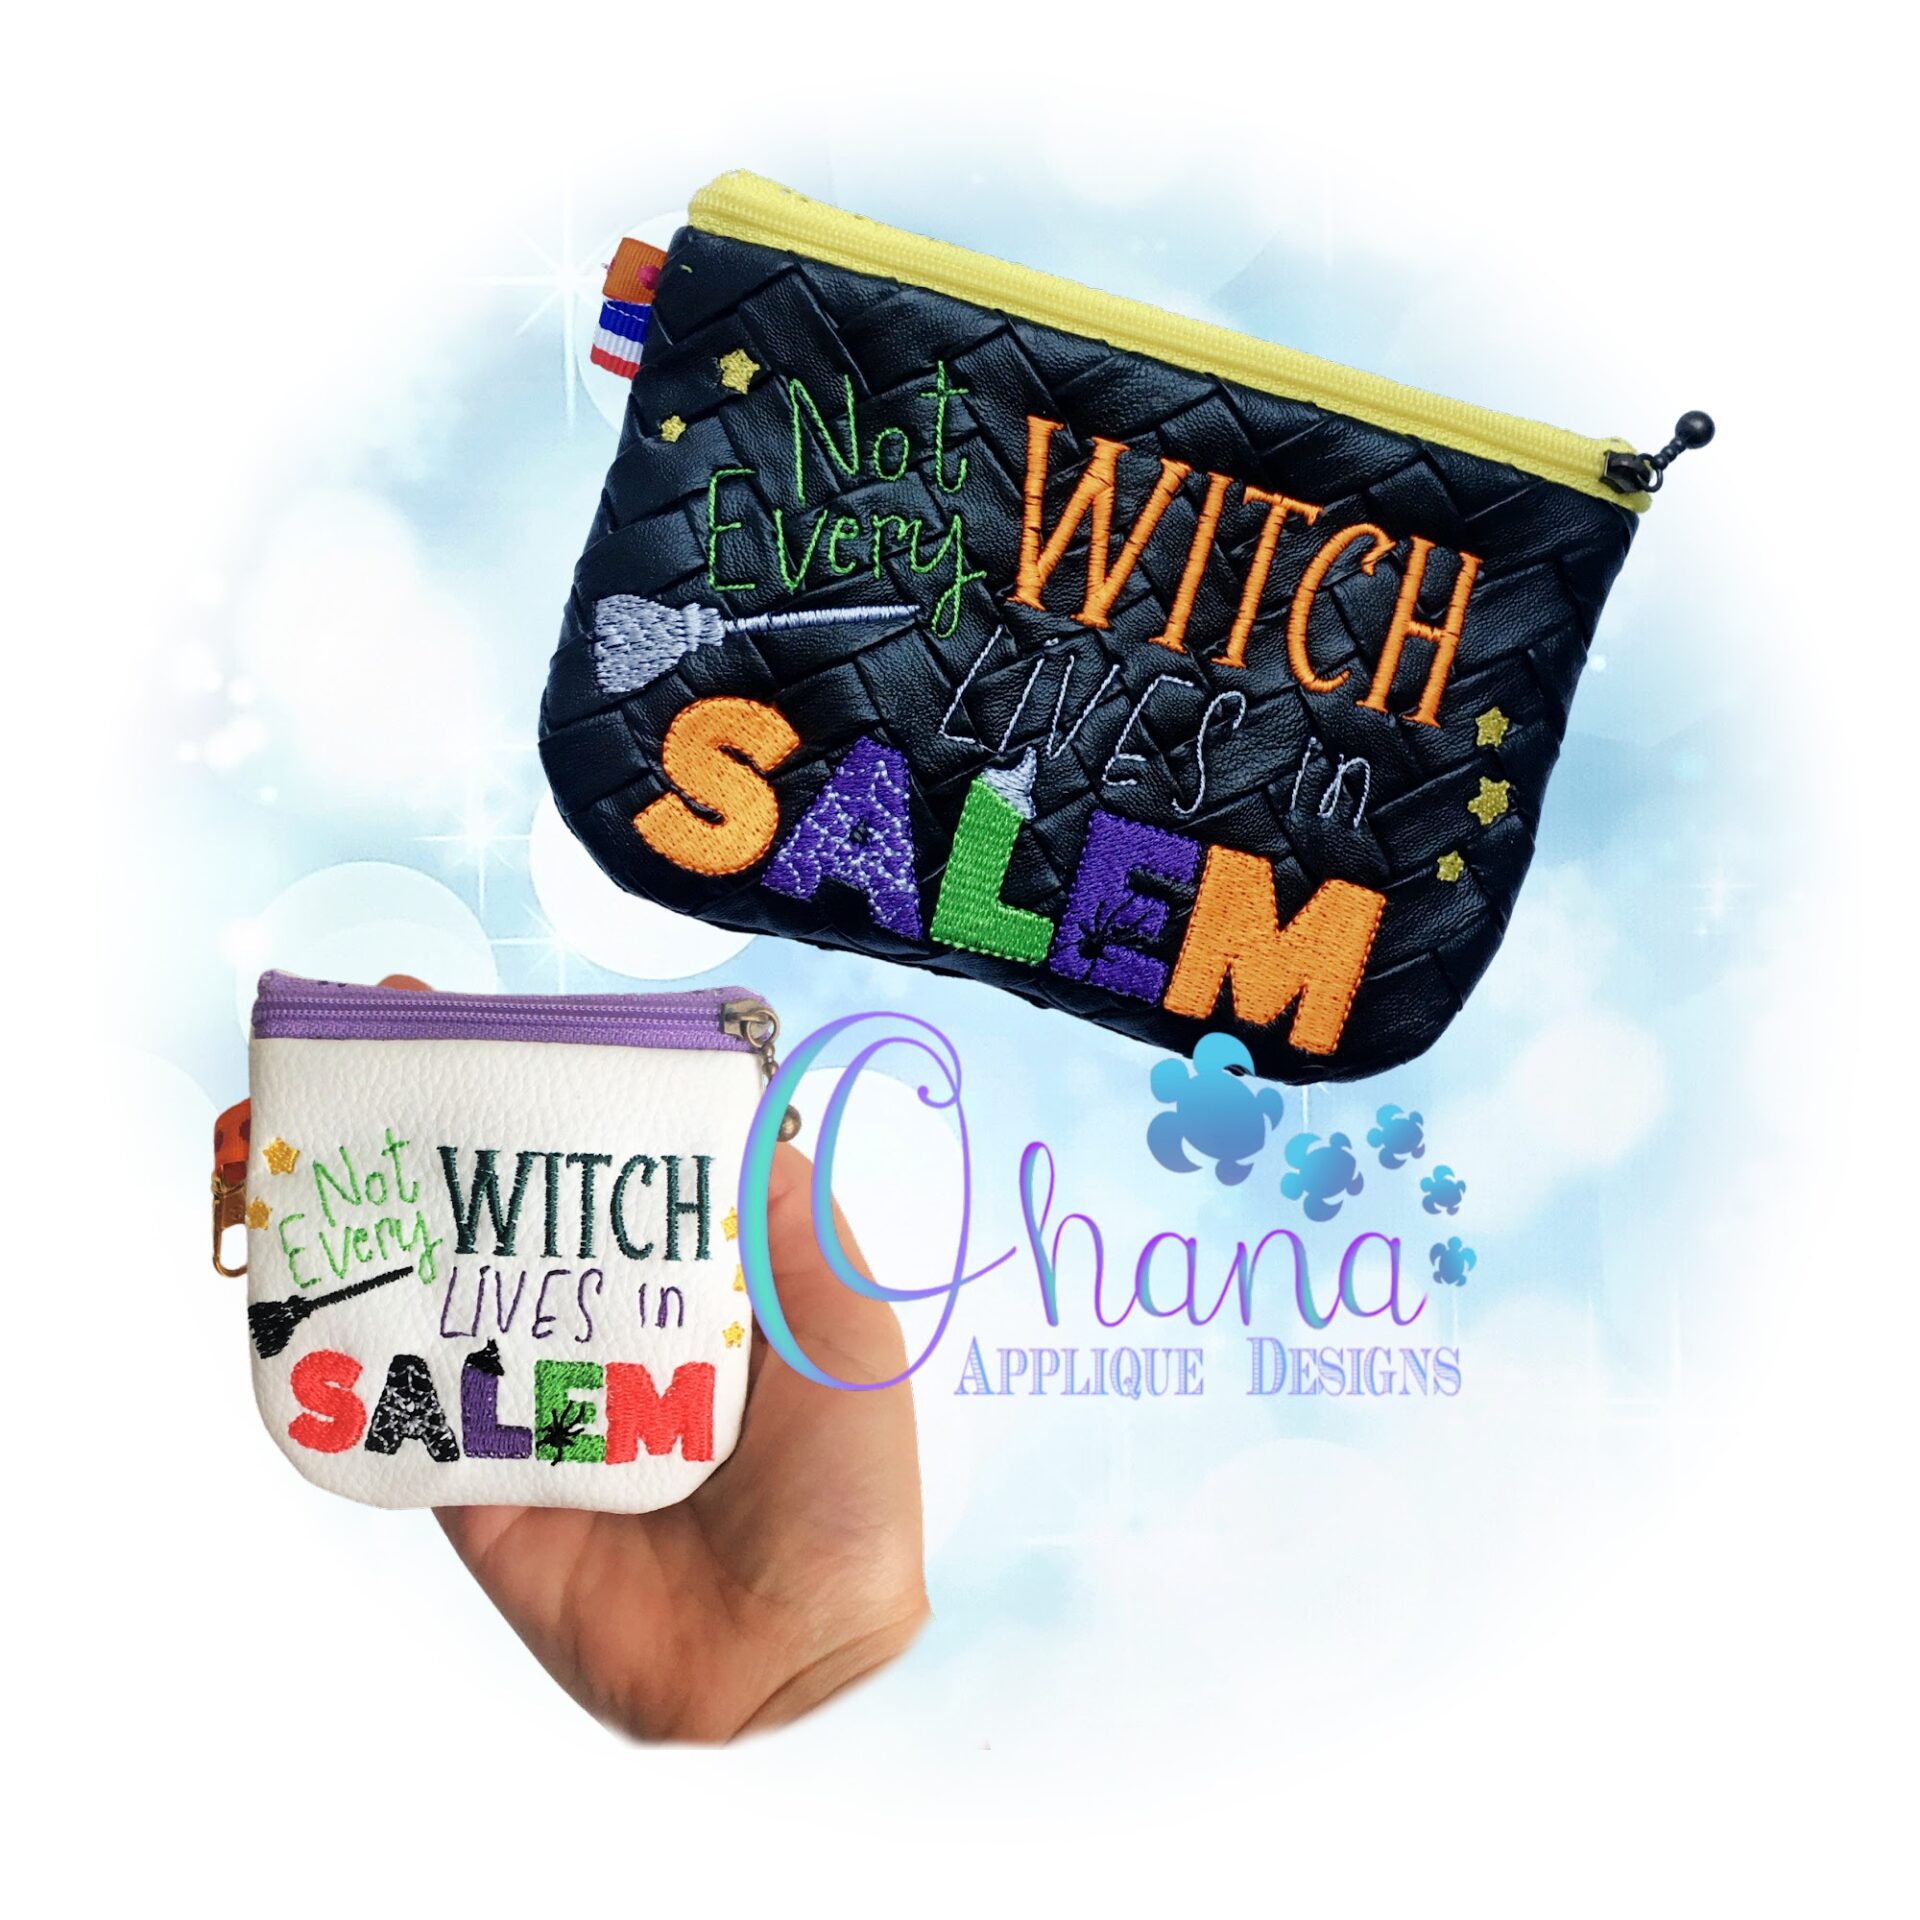 Not Every Witch Zipper Bag